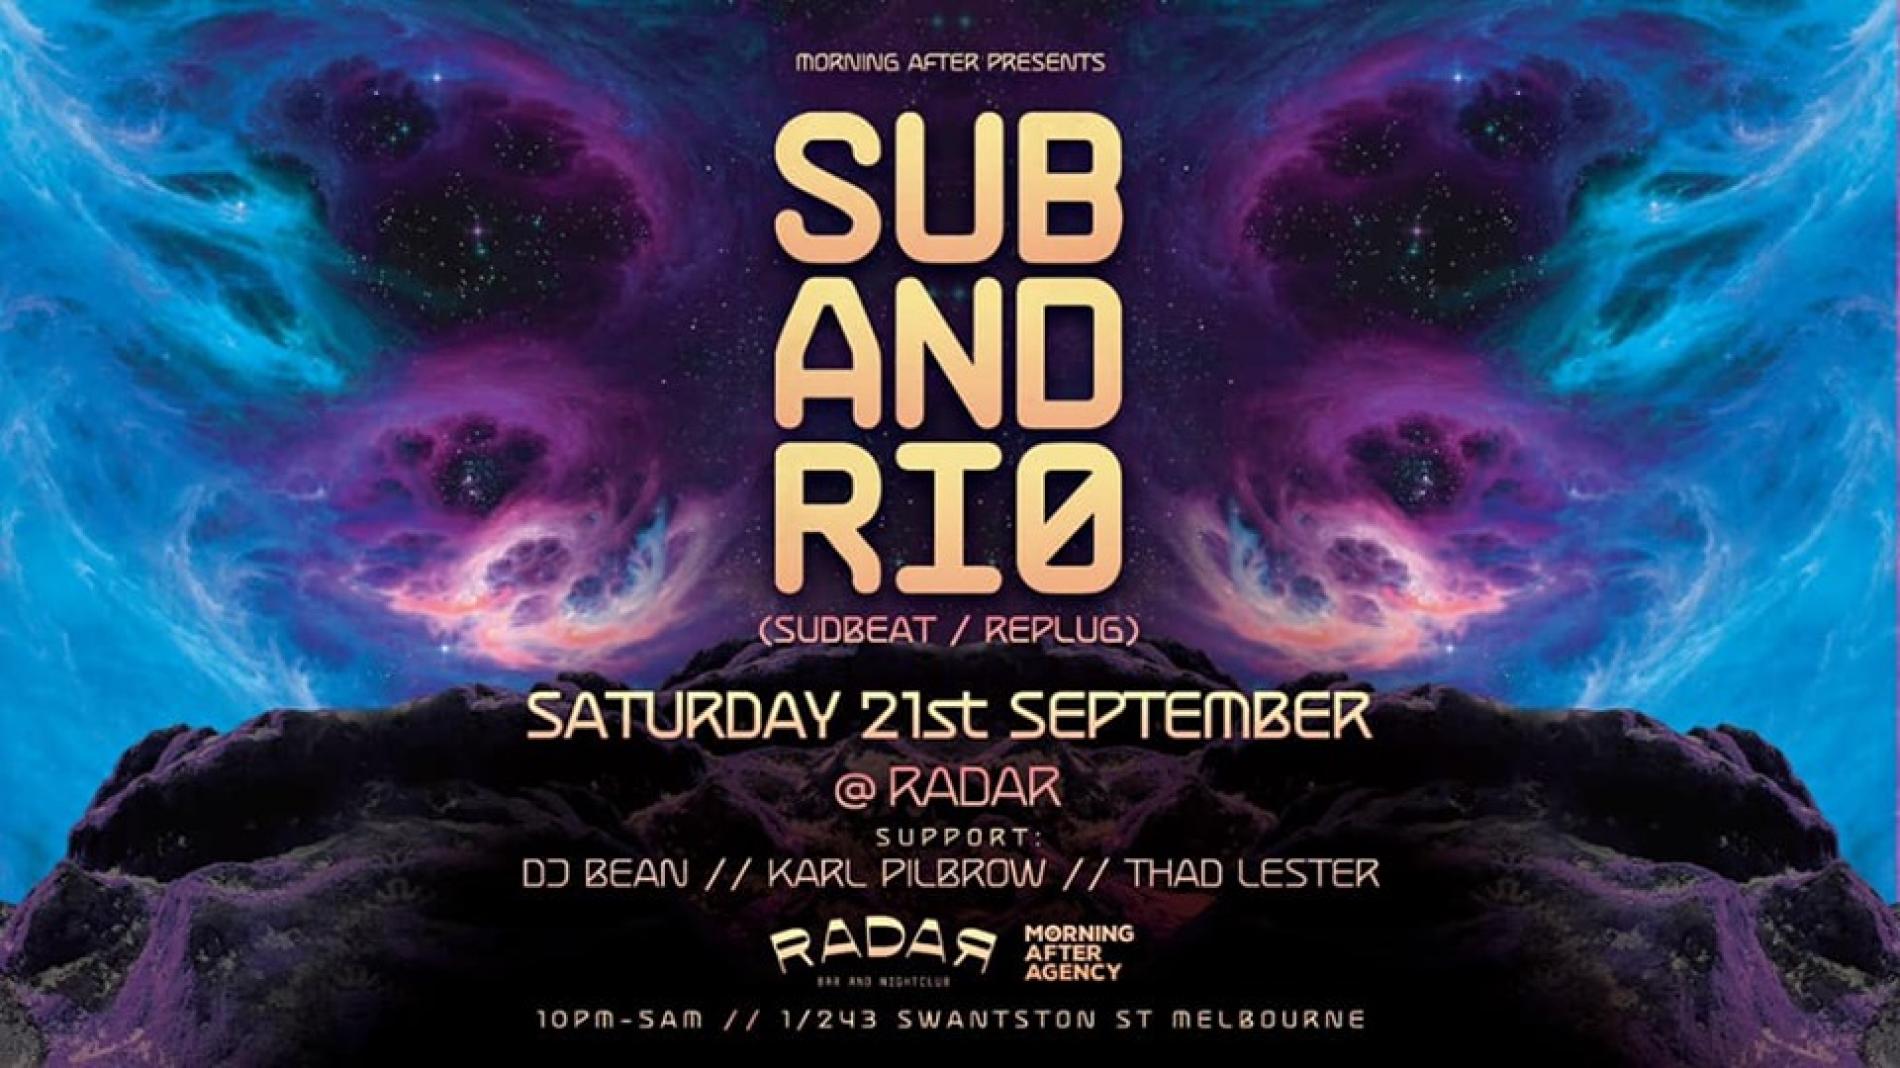 Subandrio To Hit Sydney & Melbourne This Weekend!